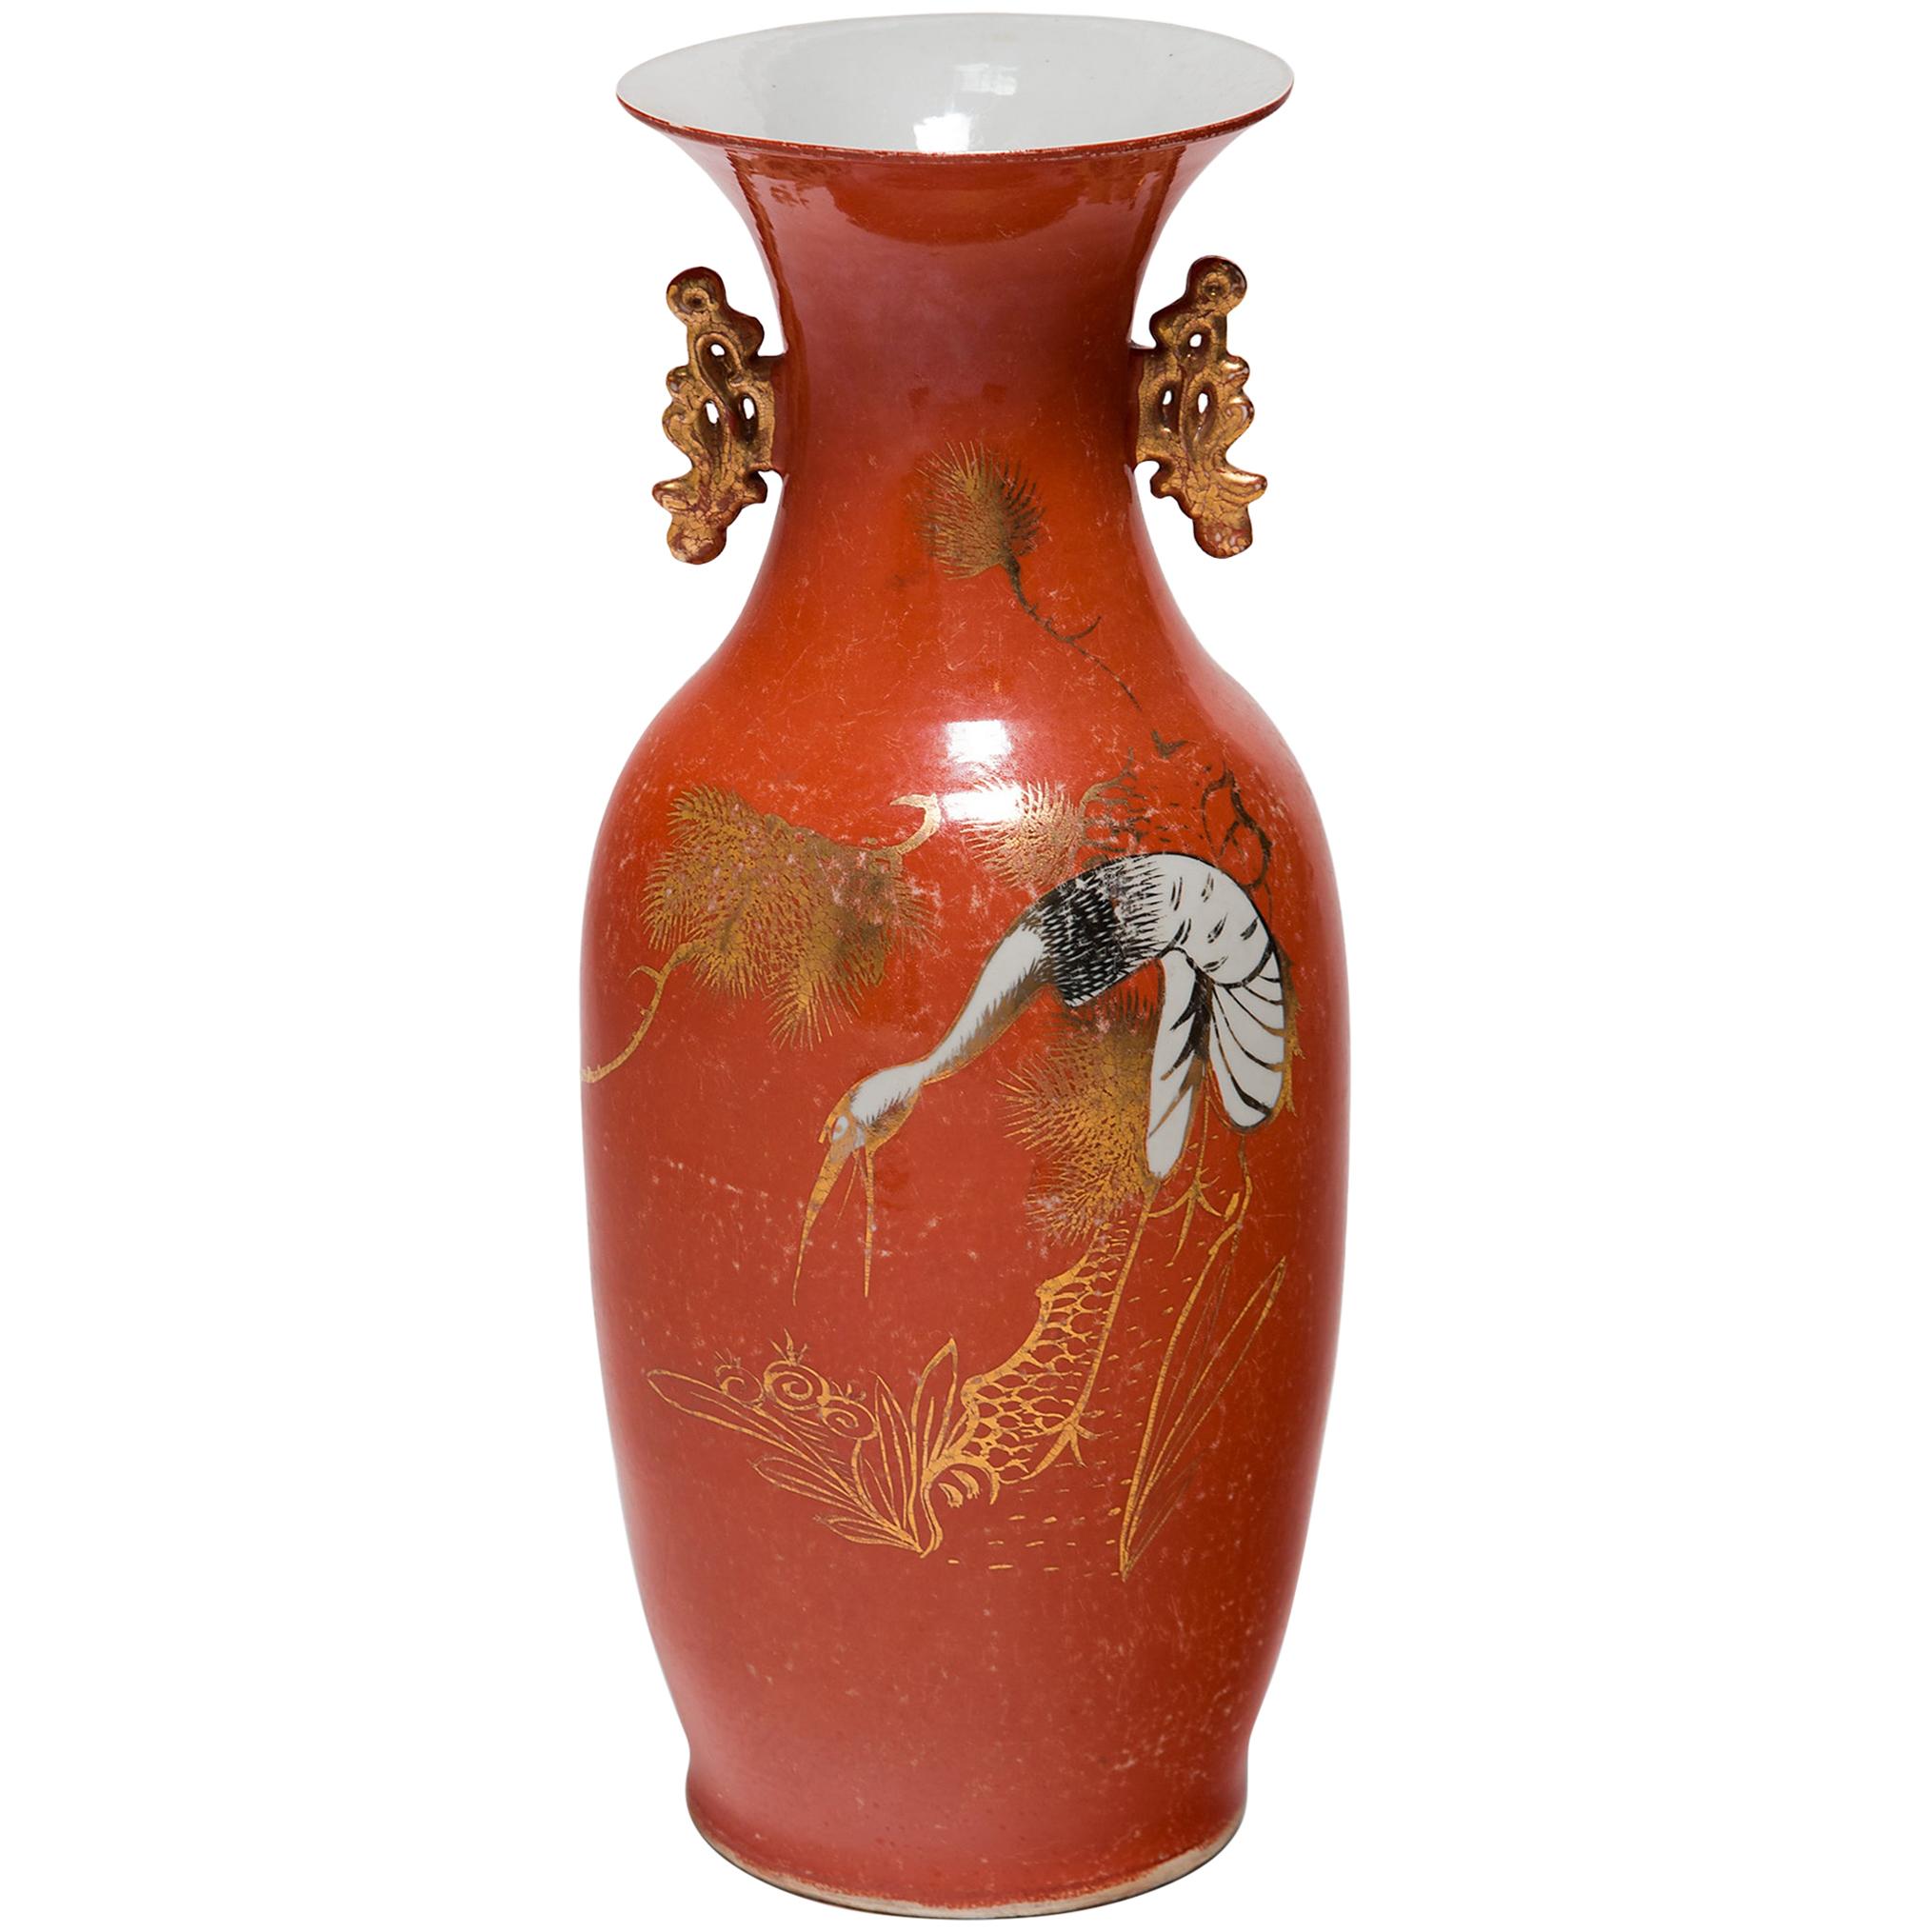 Vase persan Art Déco chinois avec grues blanches, vers 1920